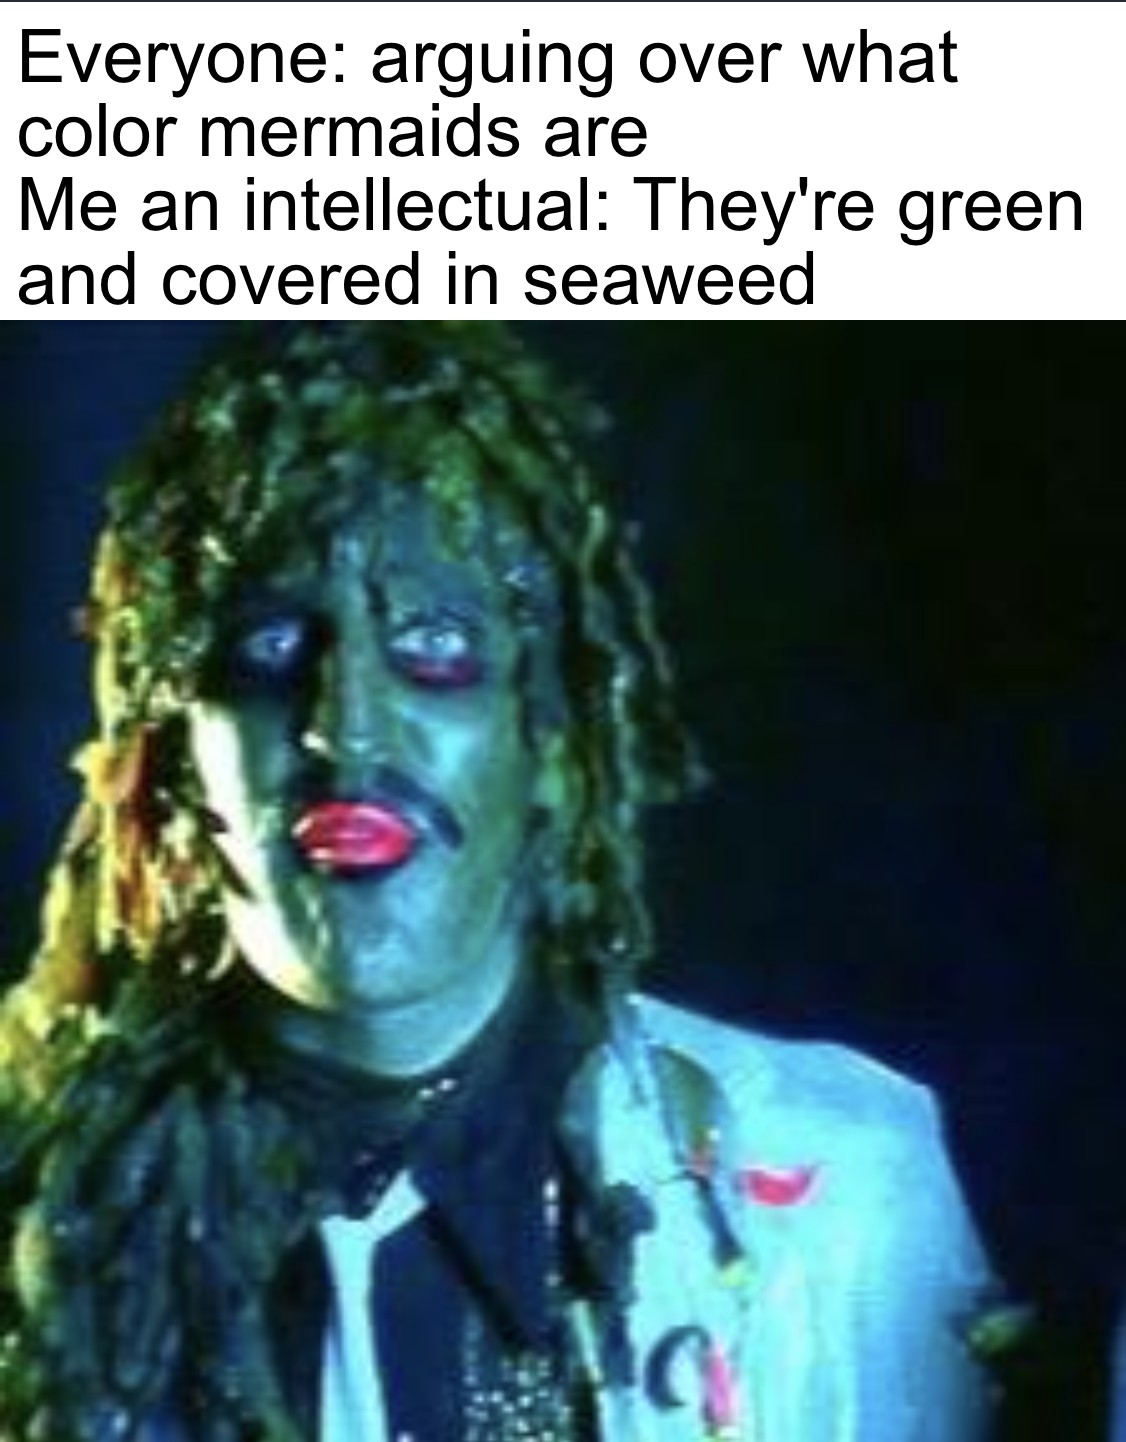 funny memes and pics - old gregg meme template - Everyone arguing over what color mermaids are Me an intellectual They're green and covered in seaweed